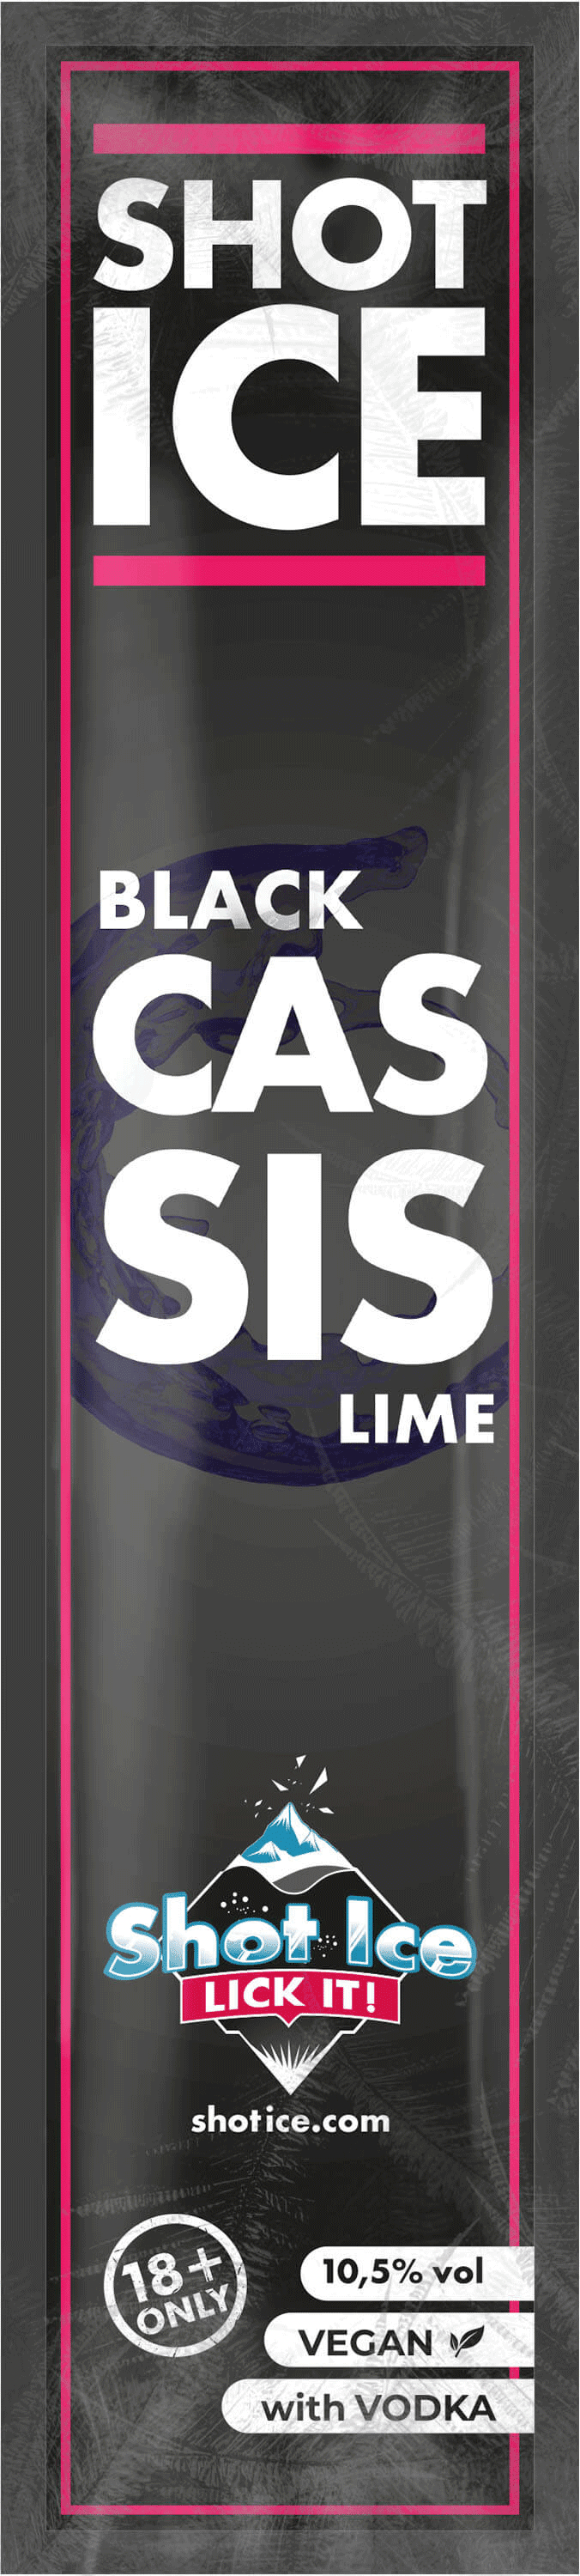 shotice-cassis-lime